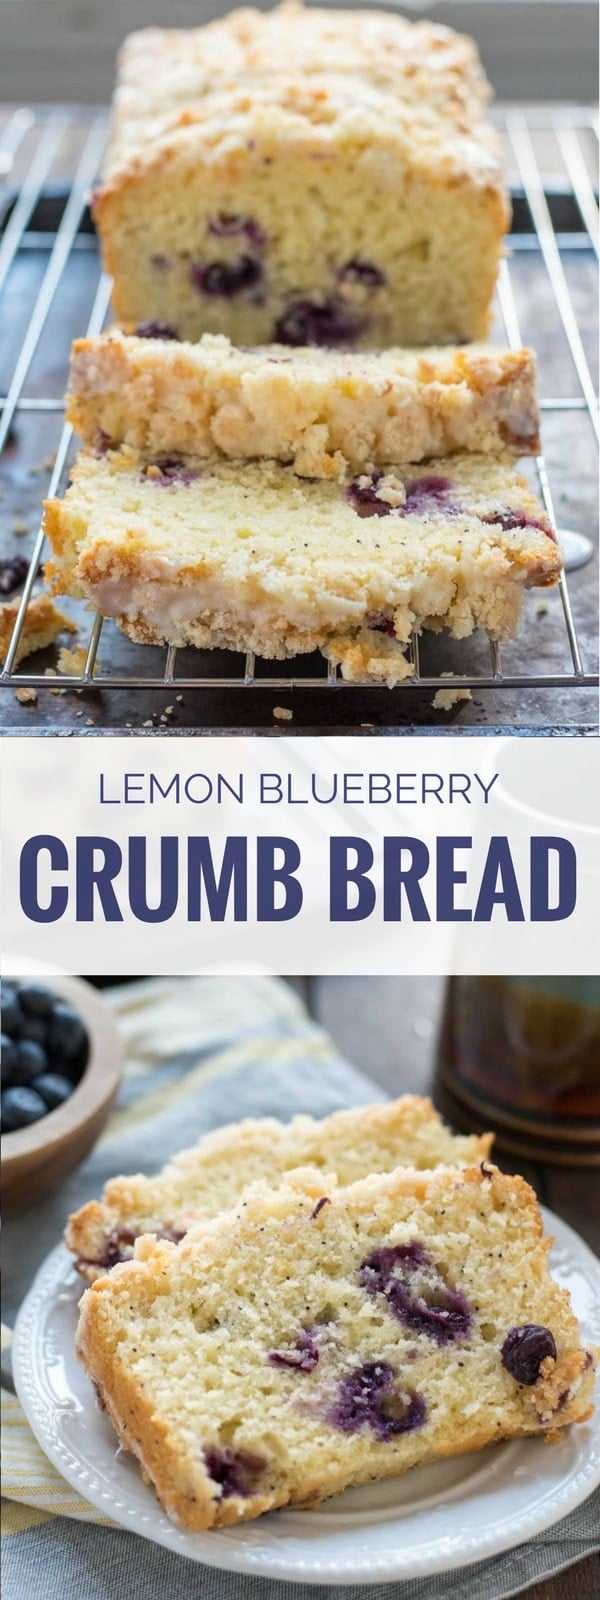 Lemon Blueberry Crumb Bread is sweet, tangy, bursting with blueberries and covered in a killer sugar crumb topping!